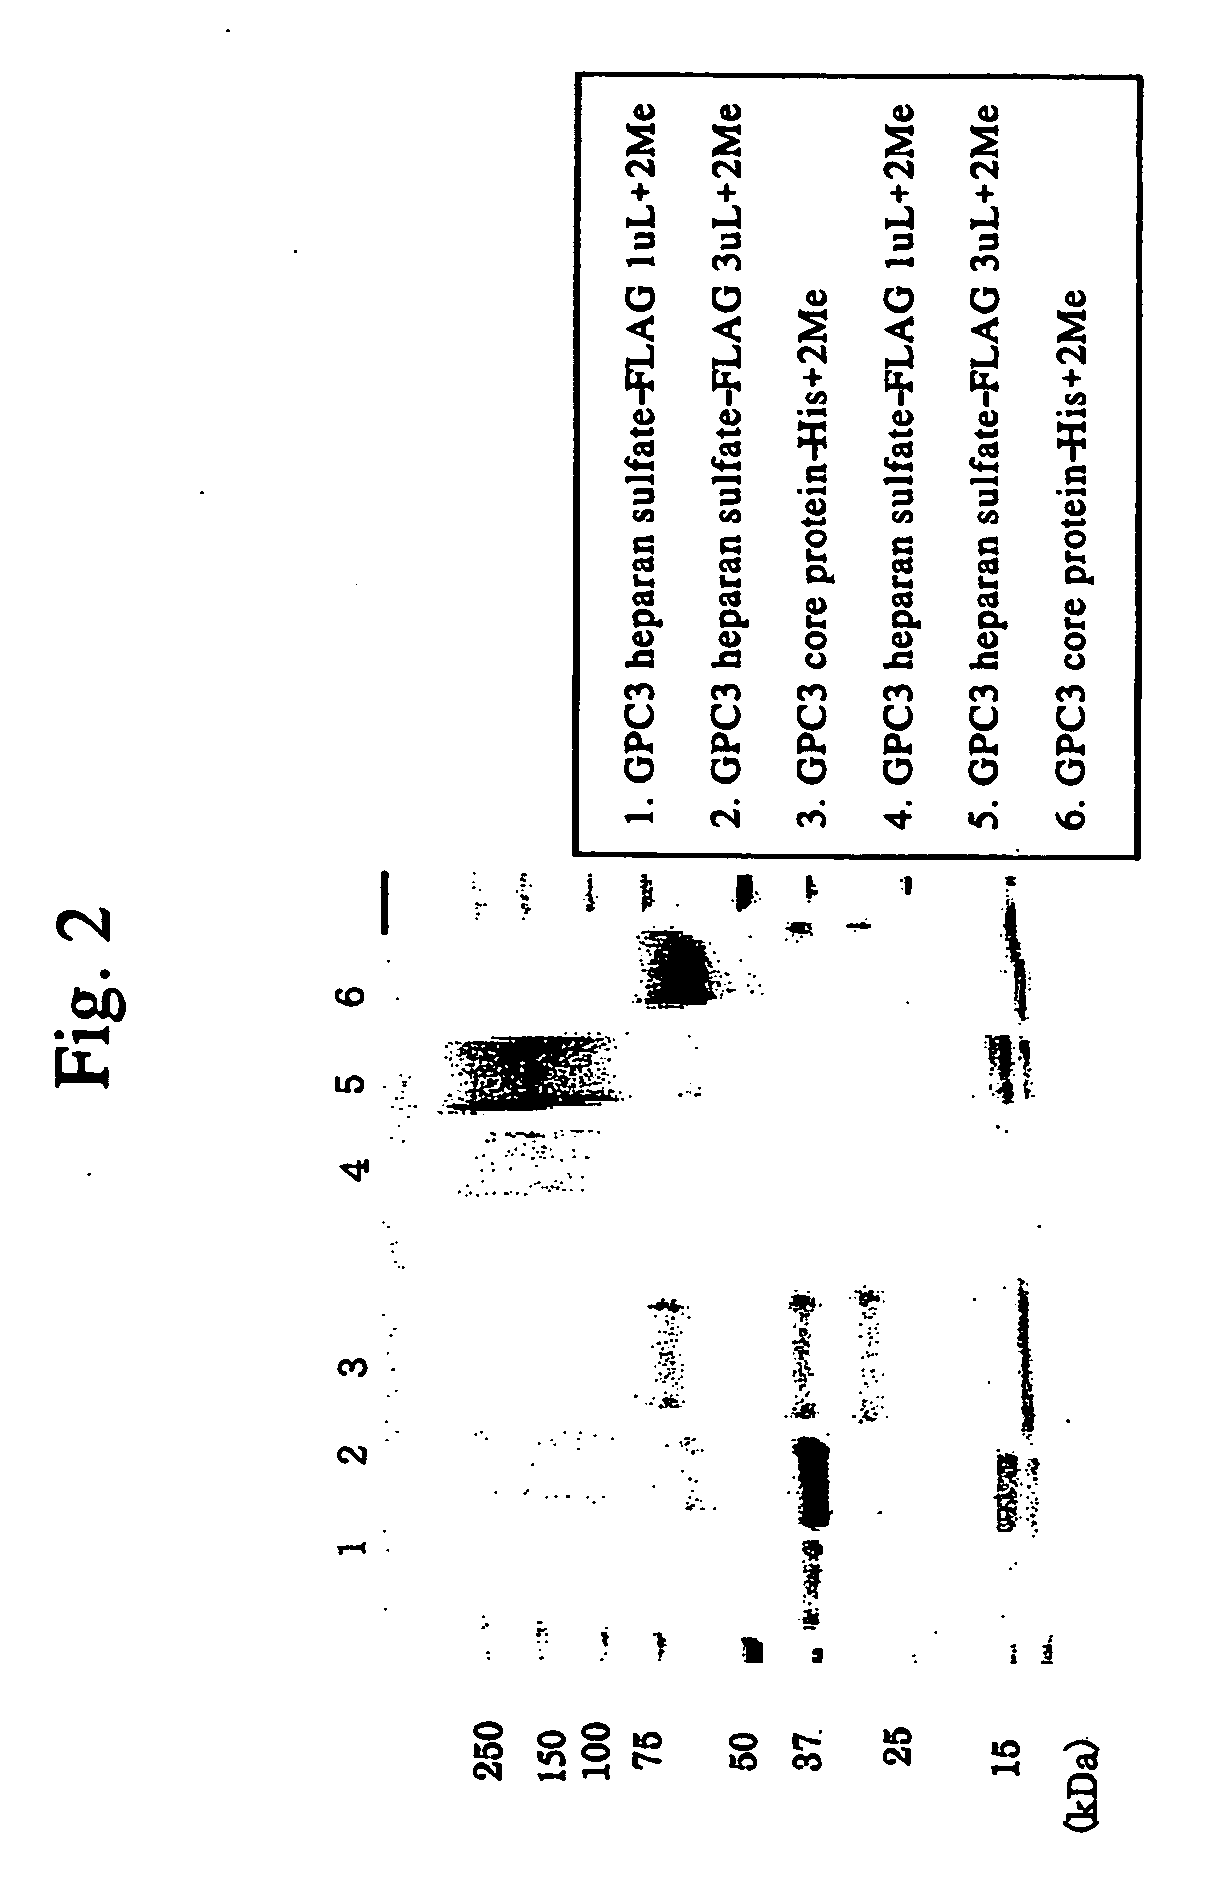 Antibody against n-terminal peptide or c-terminal peptide of gpc3 solubilized in blood